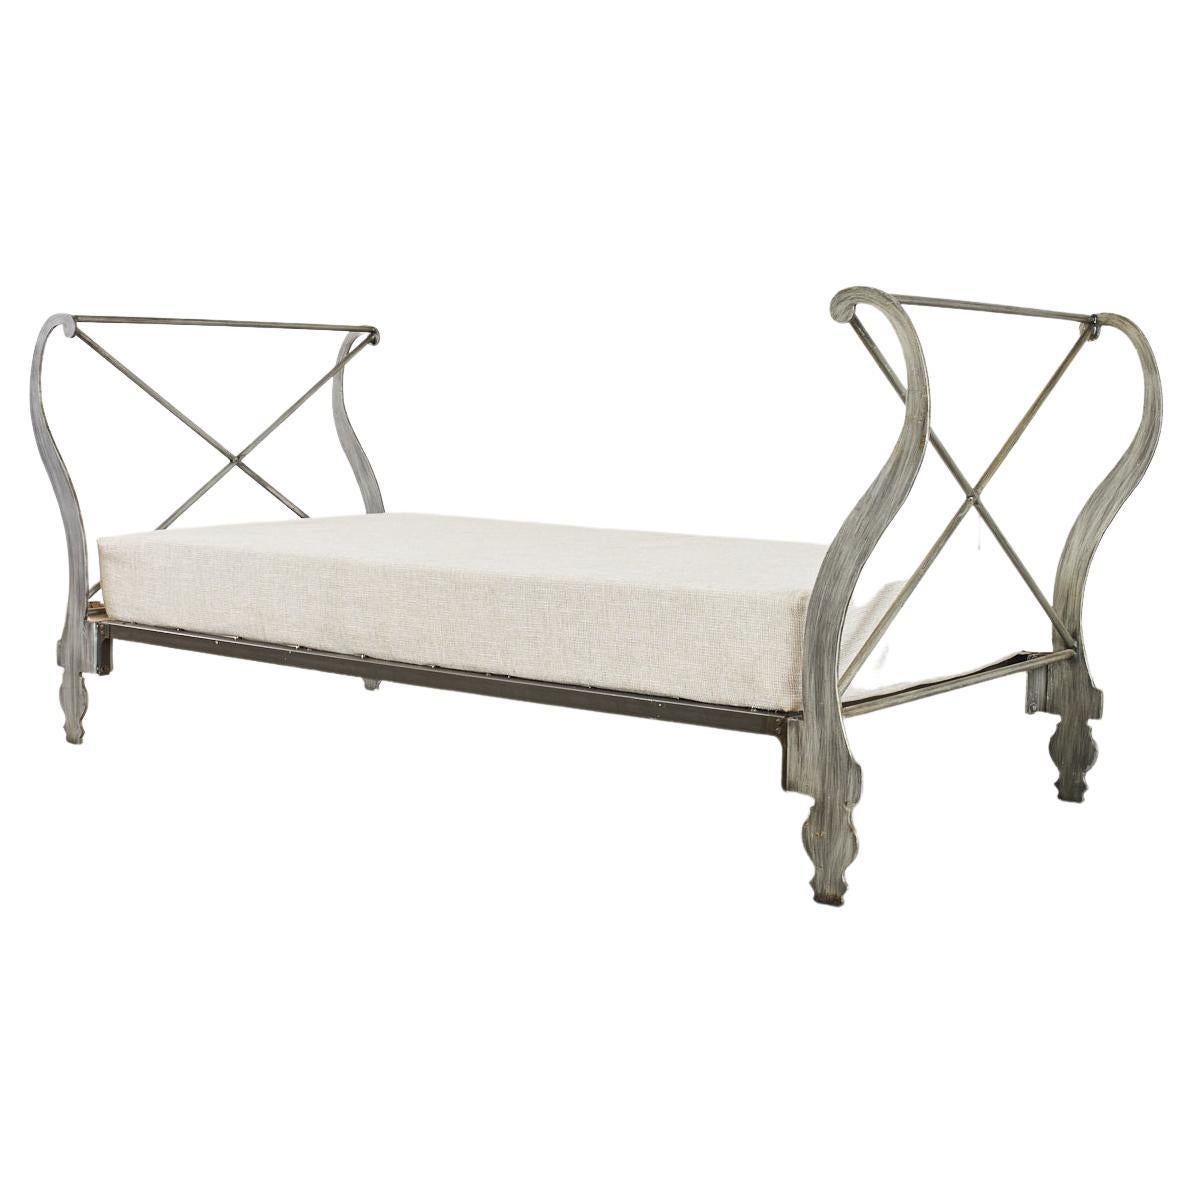 Italian Neoclassical Style Iron Scrolled Daybed